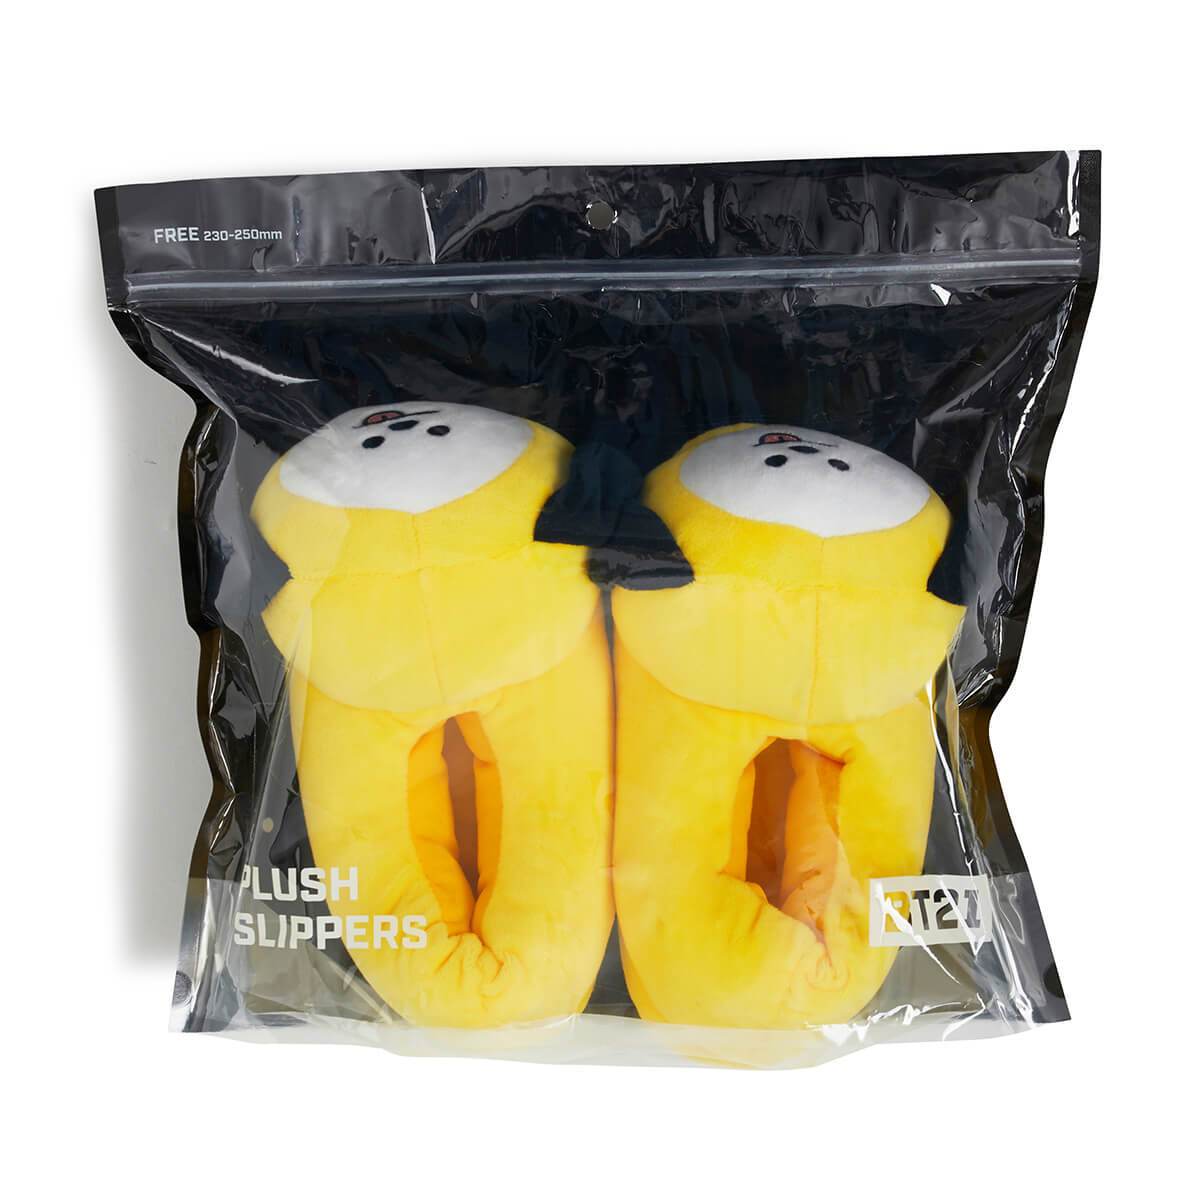 BT21 CHIMMY Plush Indoor Slippers